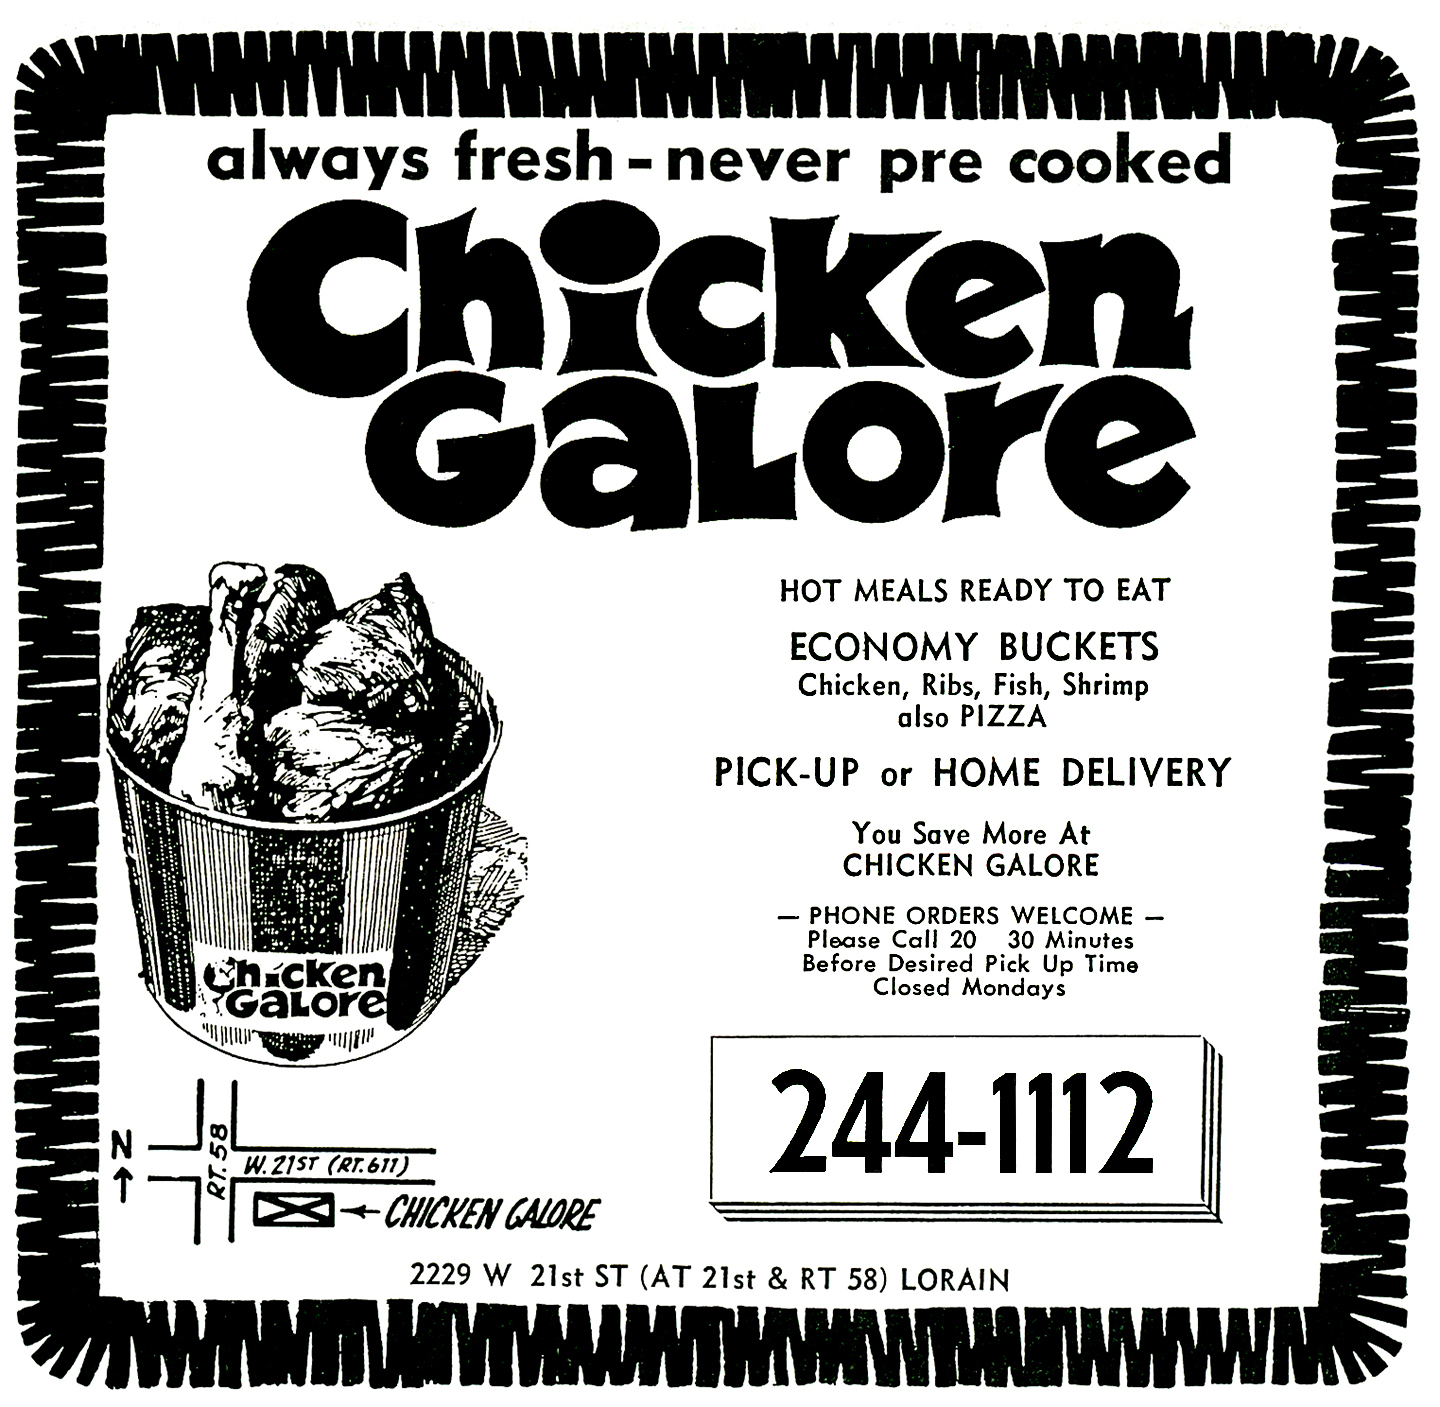 Brady's Bunch of Lorain County Nostalgia: Don't cook tonight, call Chicken  Delight! – Part 1